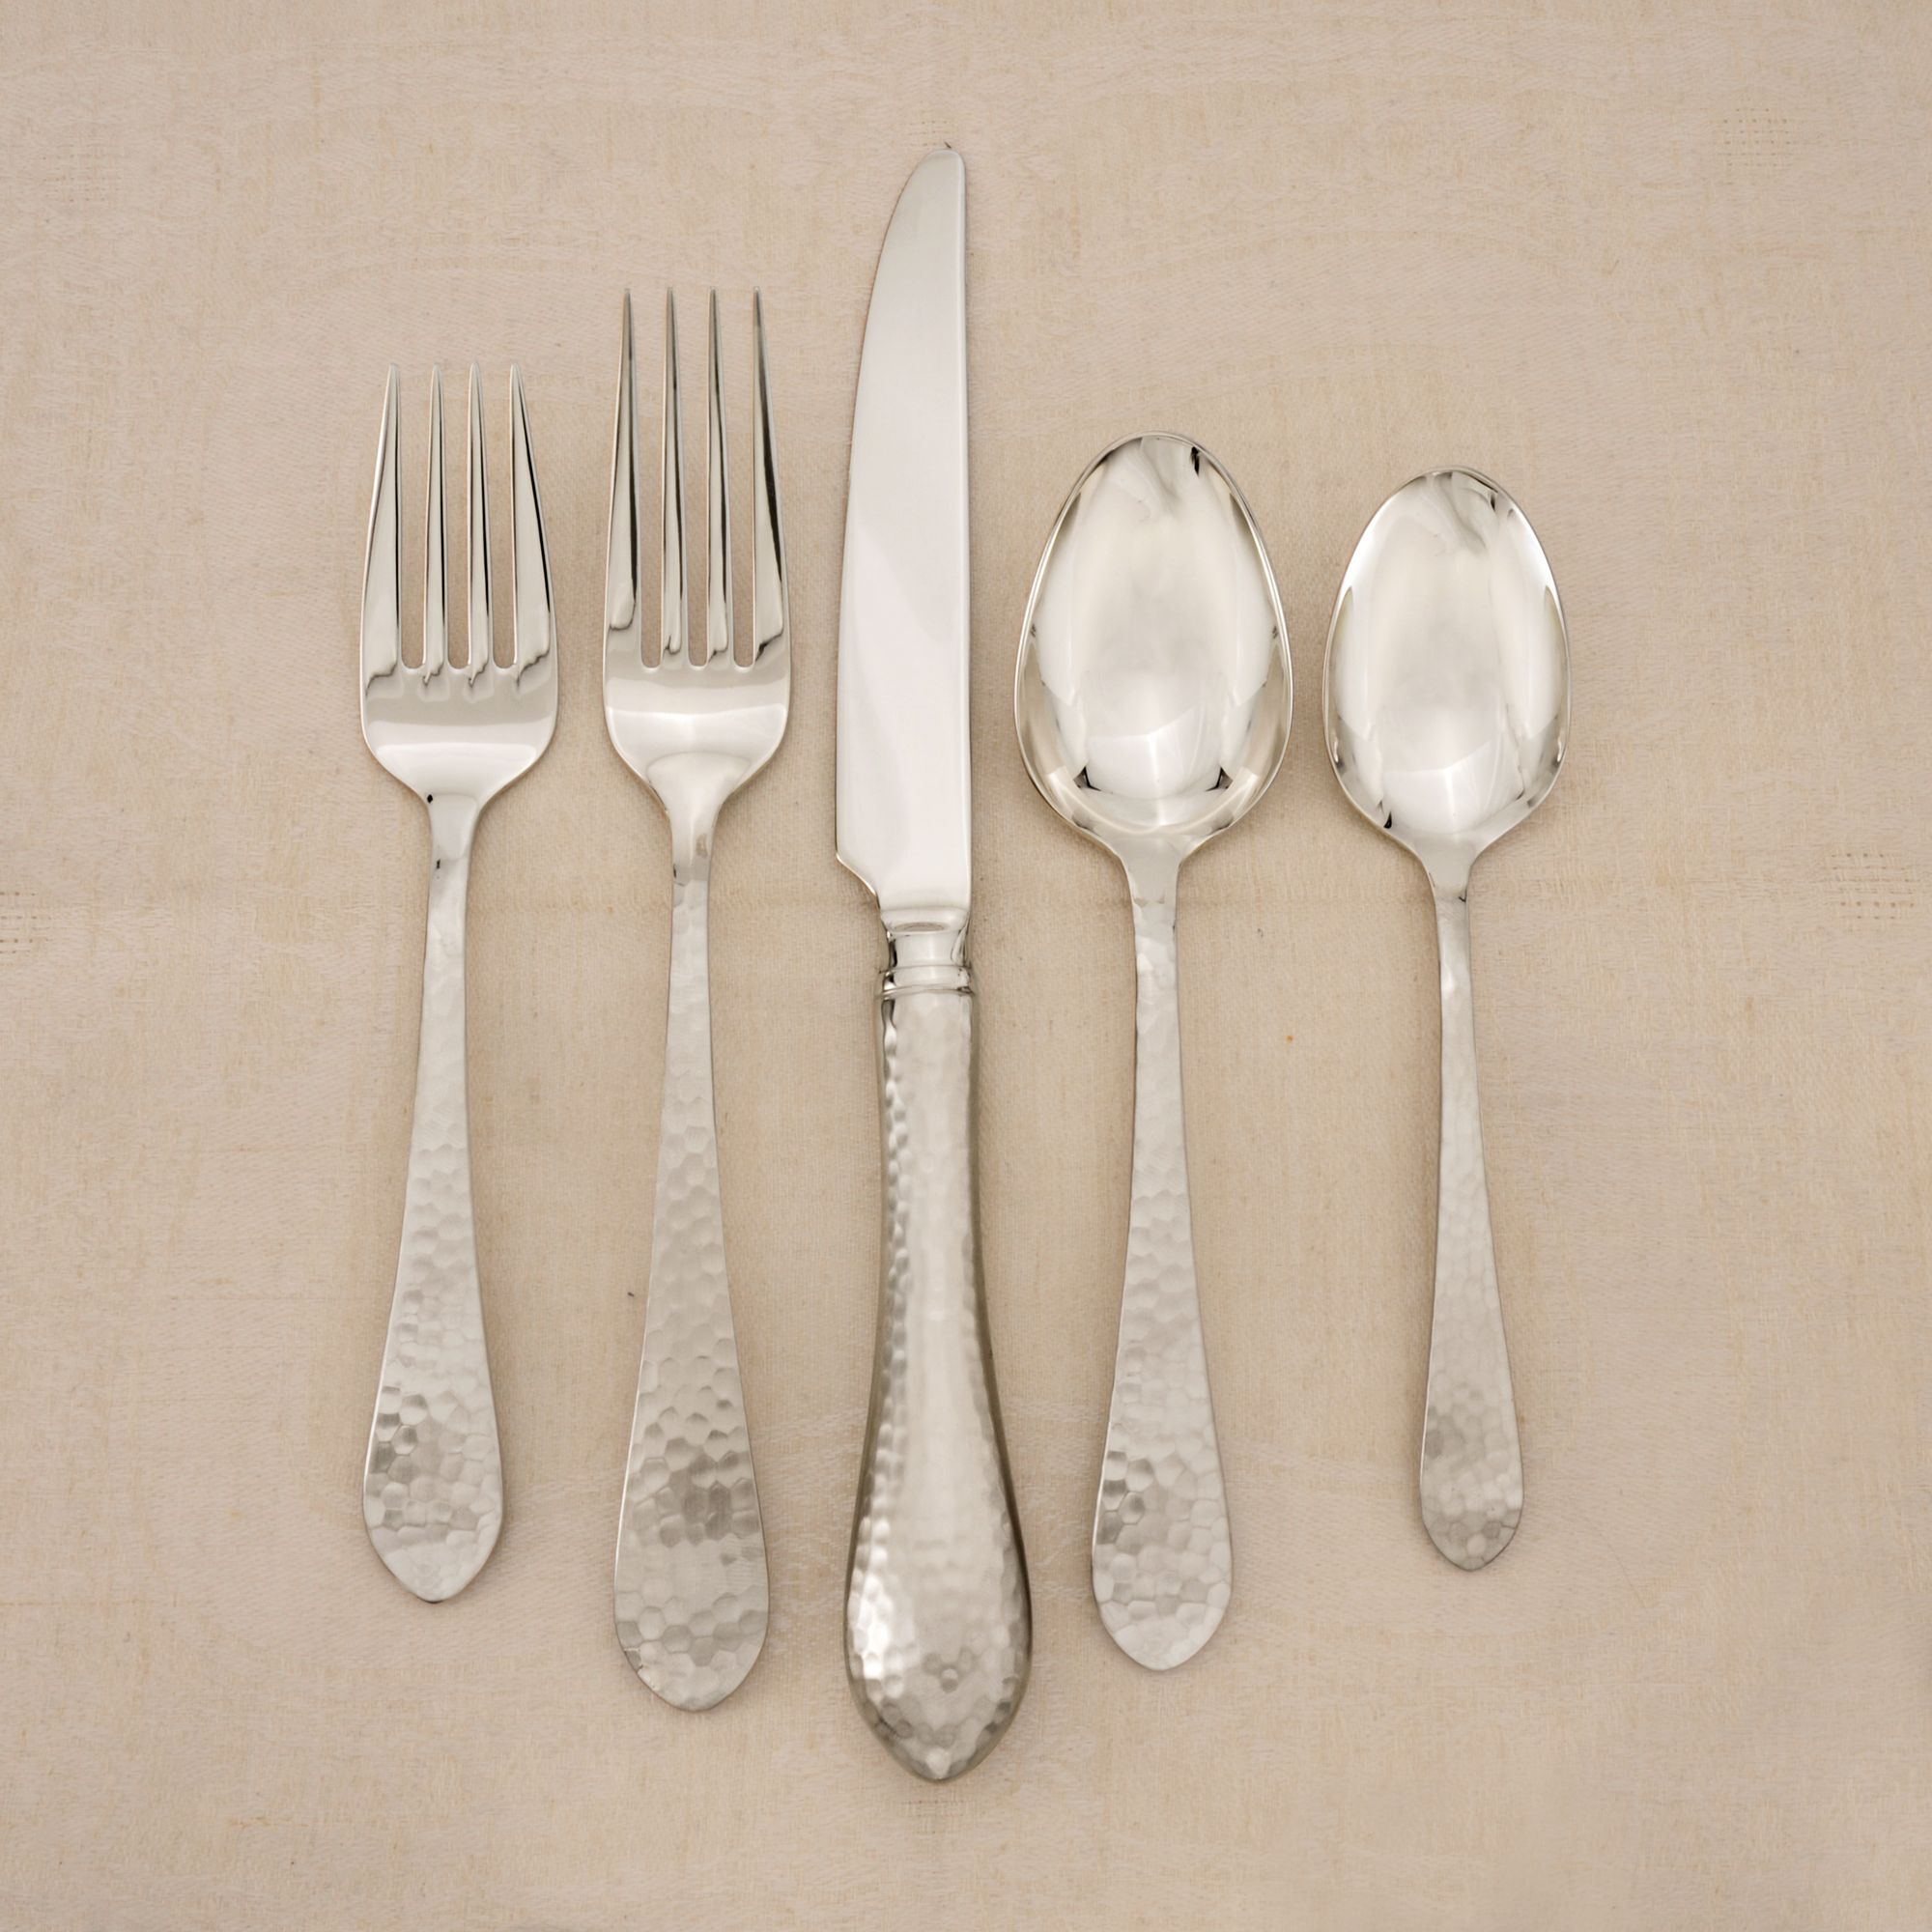 HAMMERED ANTIQUE Reed Barton 20pc Set Service for 4 Flatware Place Settings